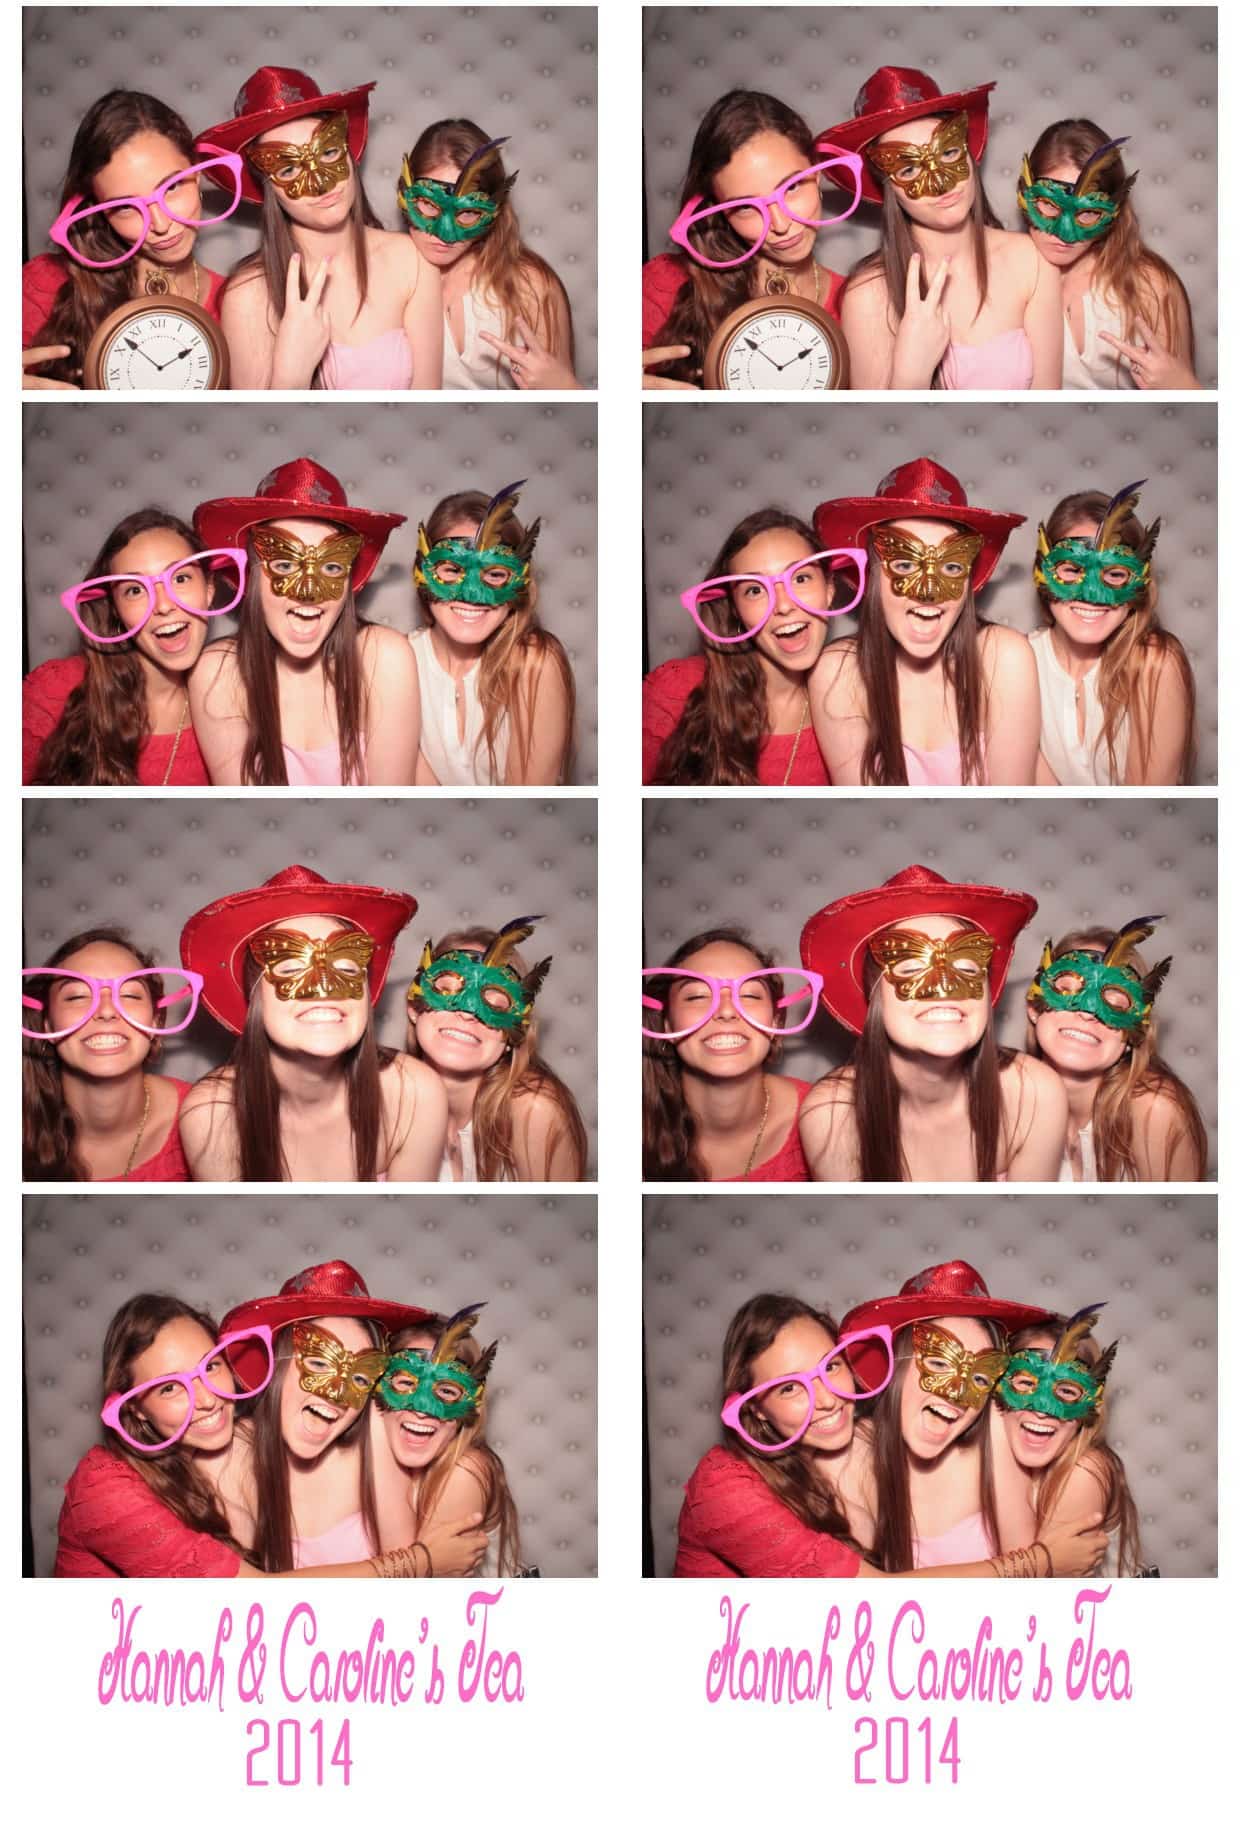 Photo-Booth-Rental-Austin-Party-High-School-Graduation-No.1-Affordable